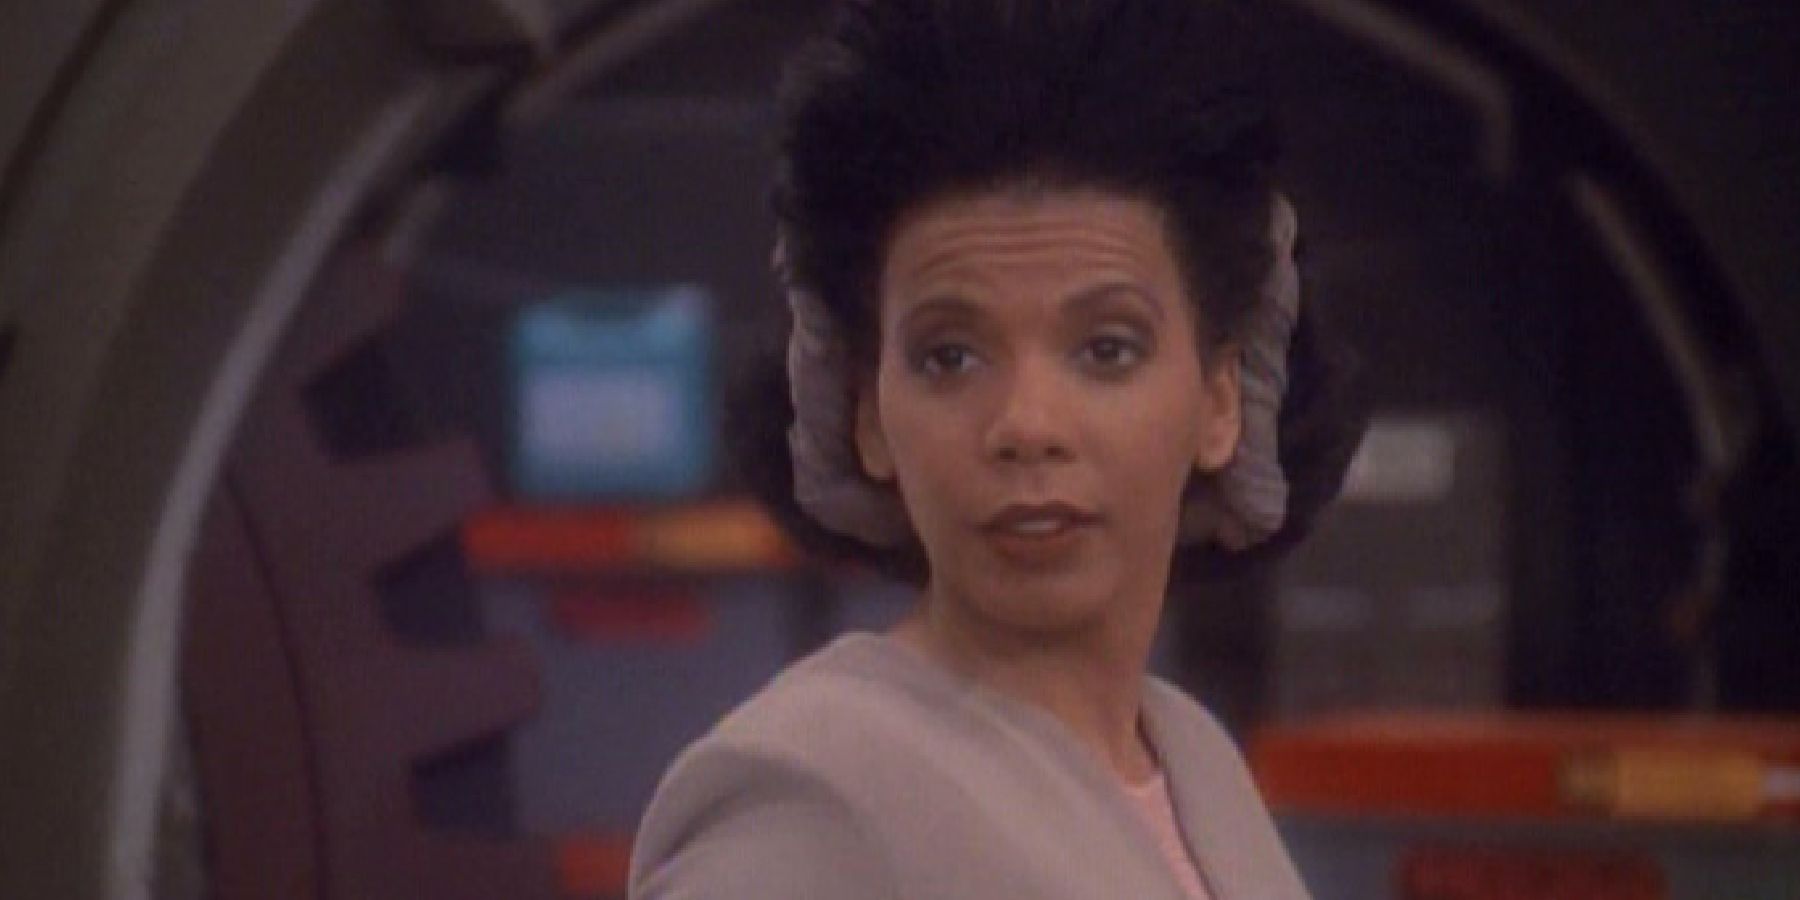 DS9s Maquis Two Parter Changed Star Trek Forever